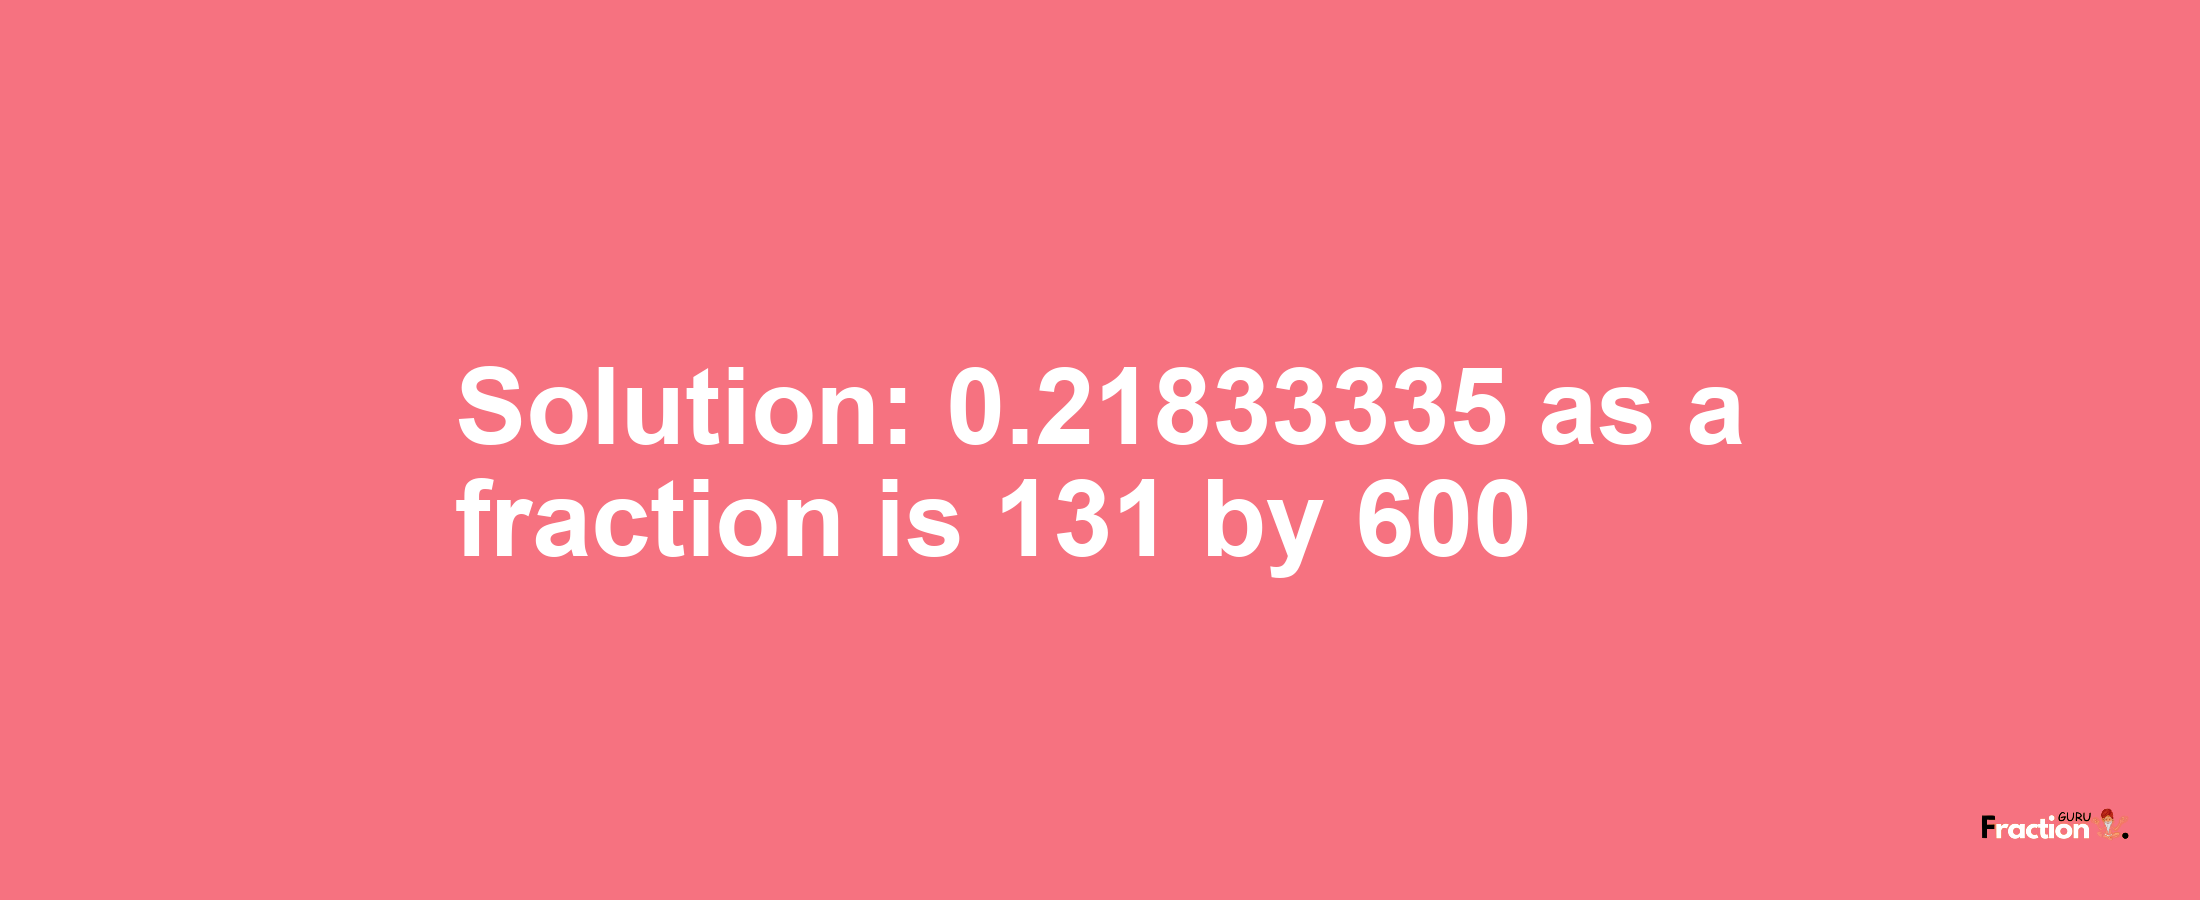 Solution:0.21833335 as a fraction is 131/600